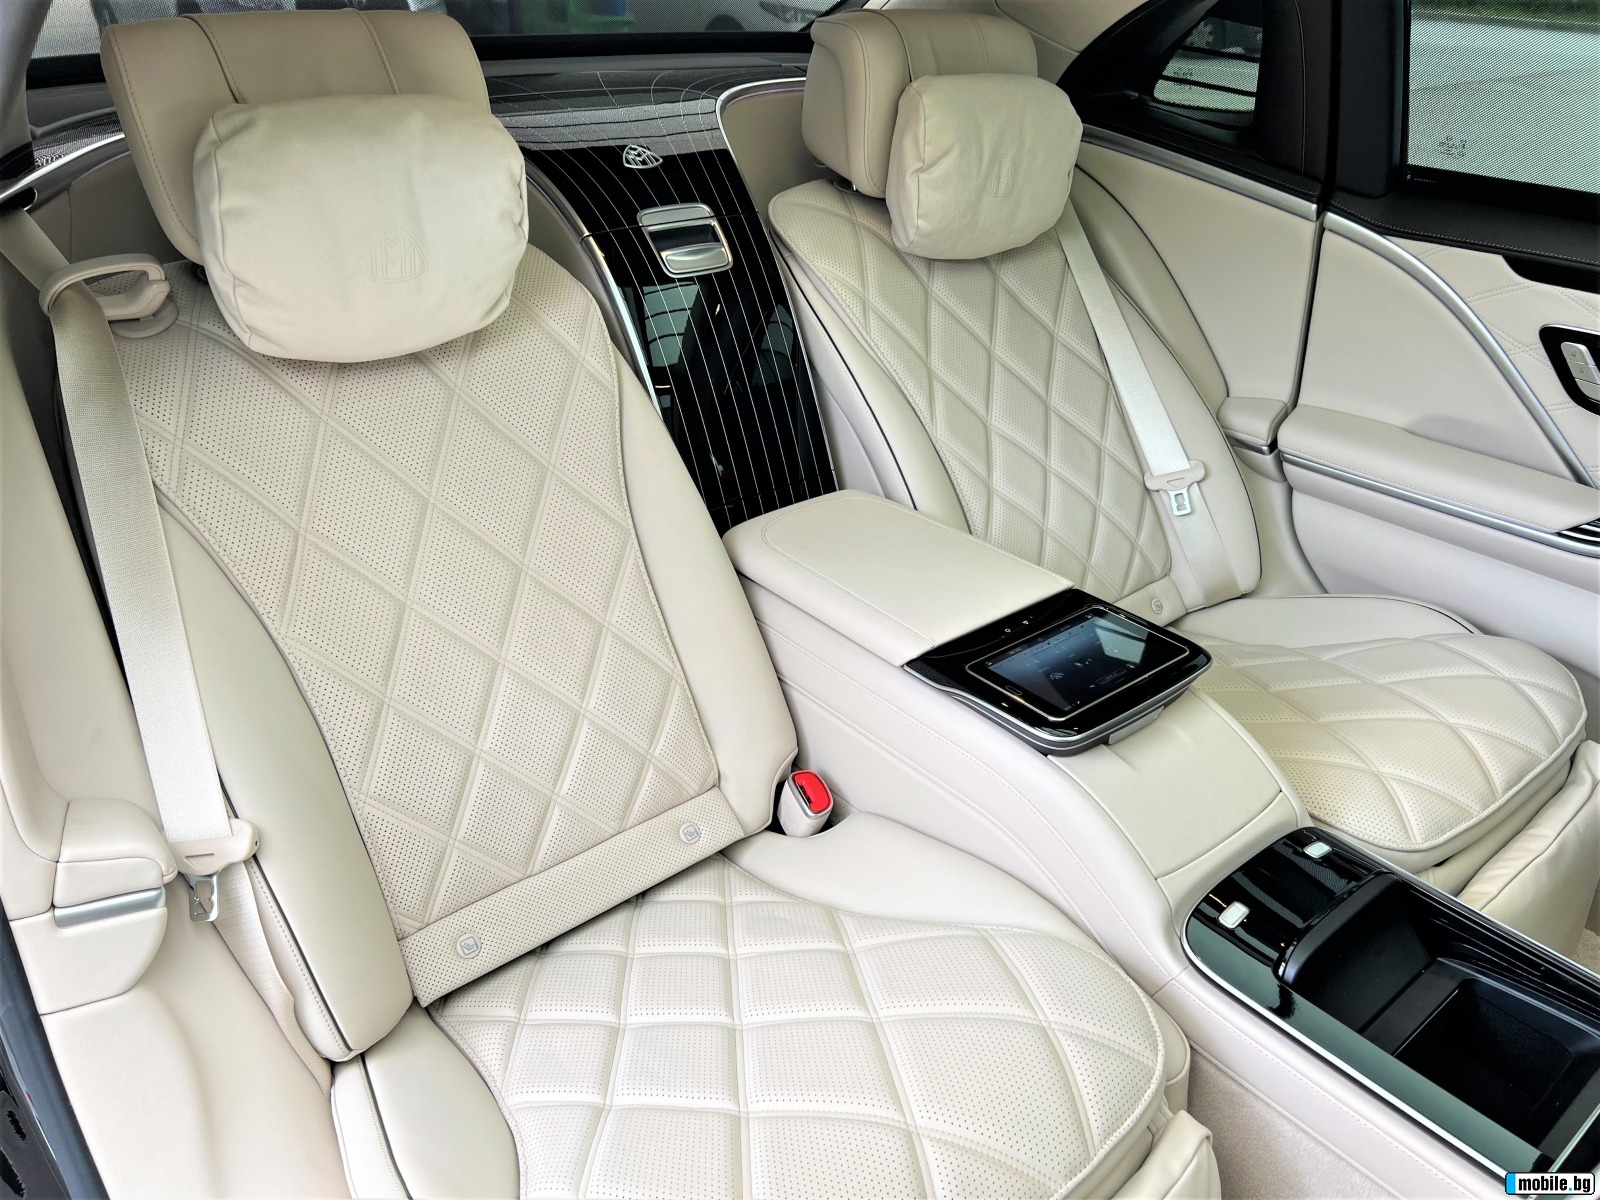 Mercedes-Benz S580 MAYBACH/ 4M/ DESIGNO/ EXCLUSIVE/ FIRST CLASS/ 20/  | Mobile.bg   14